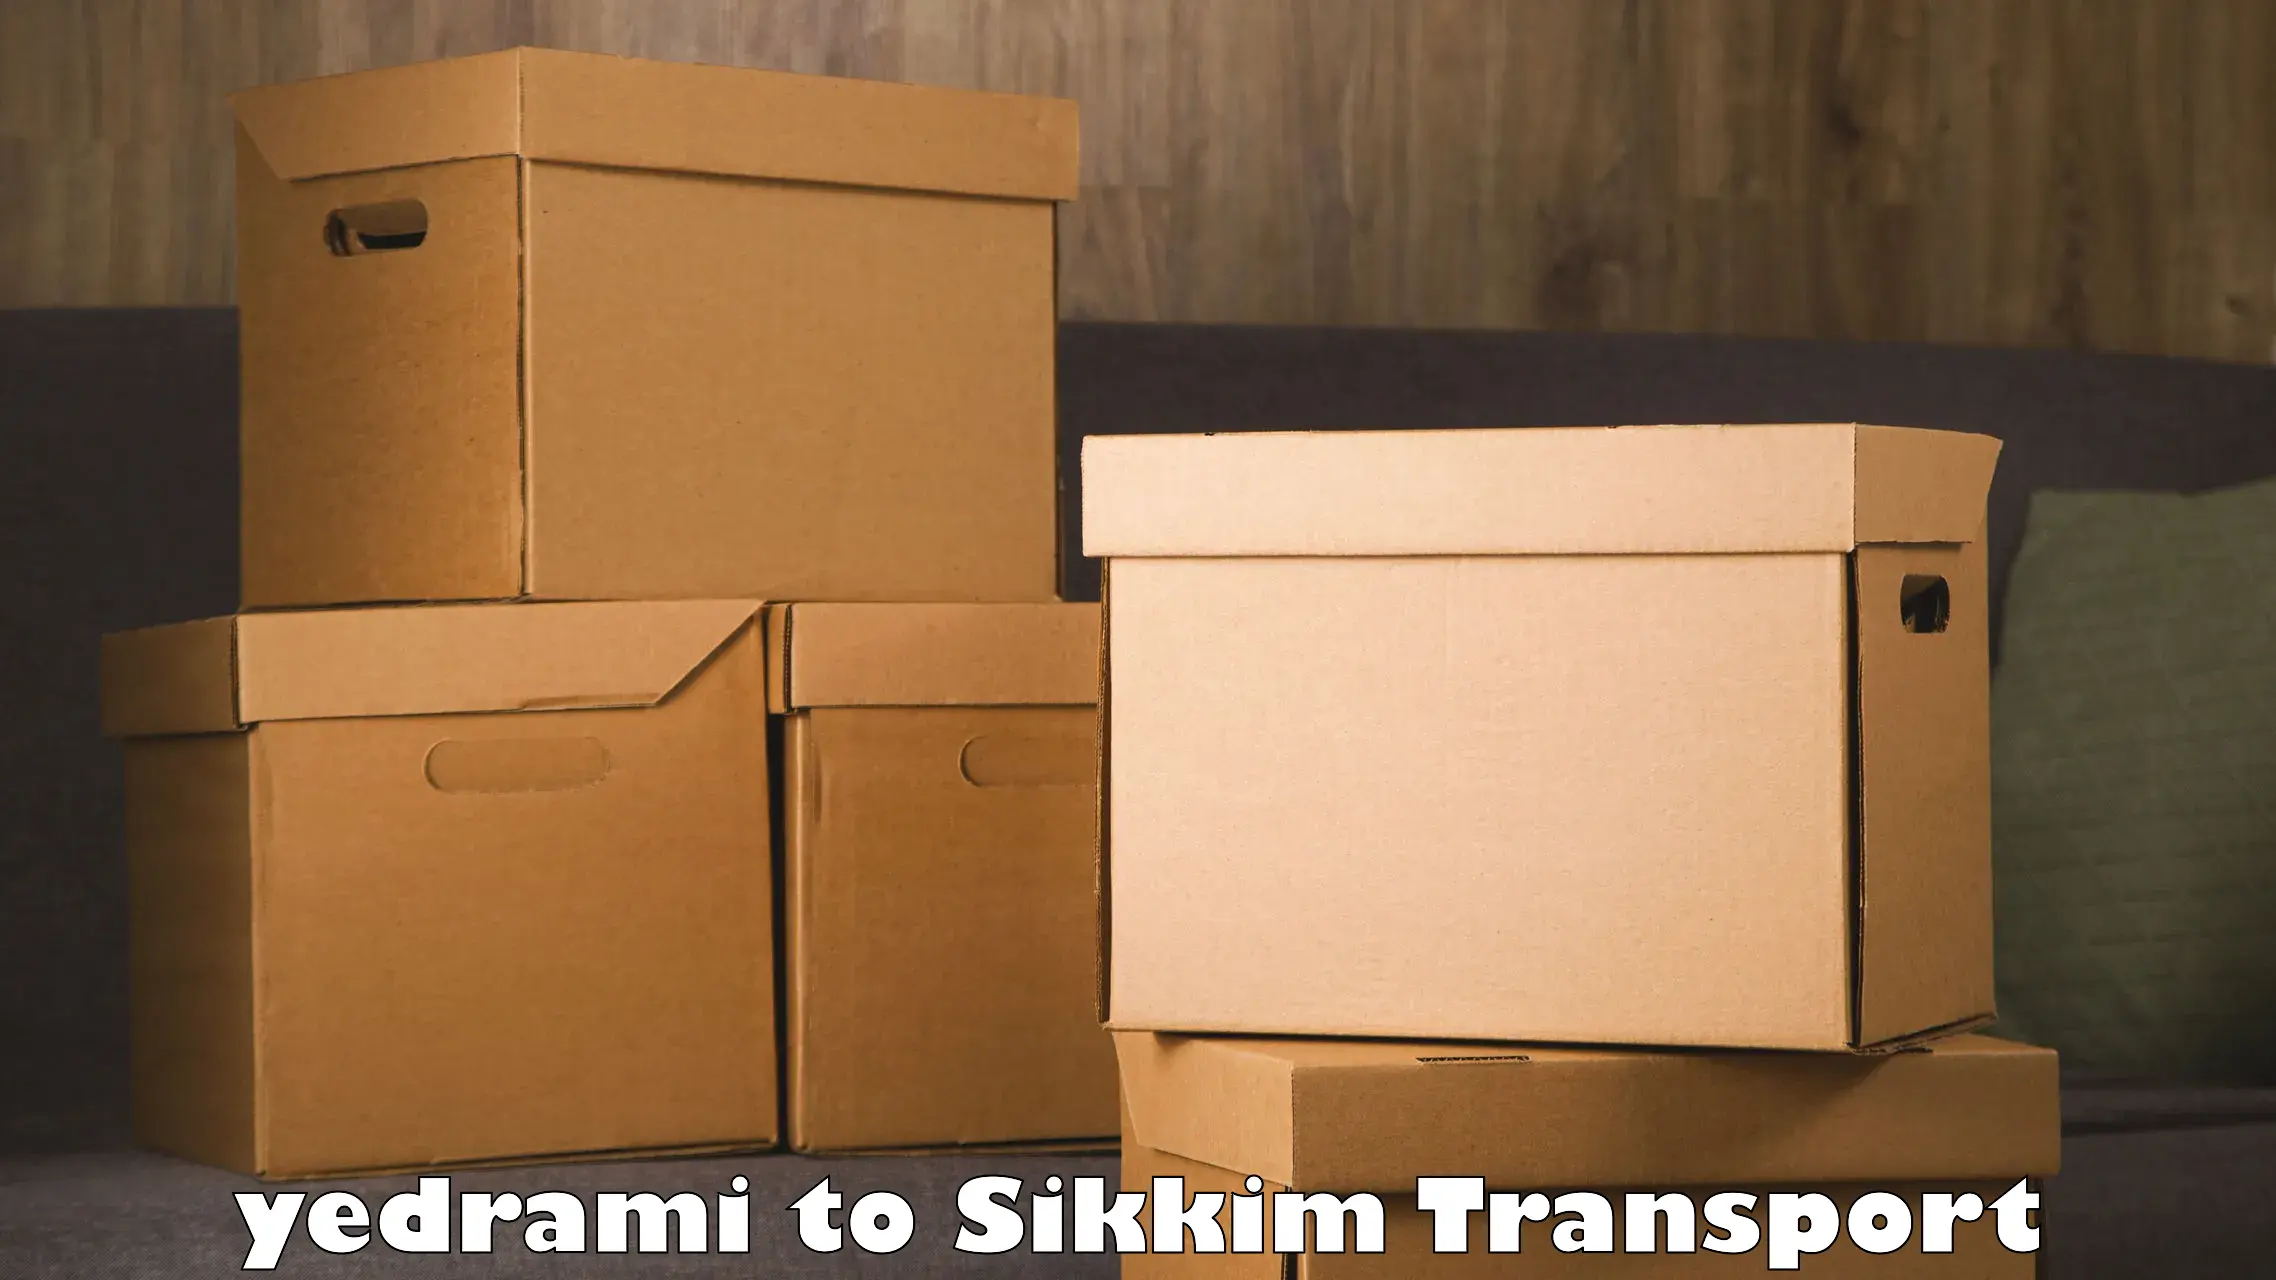 Truck transport companies in India yedrami to Pelling